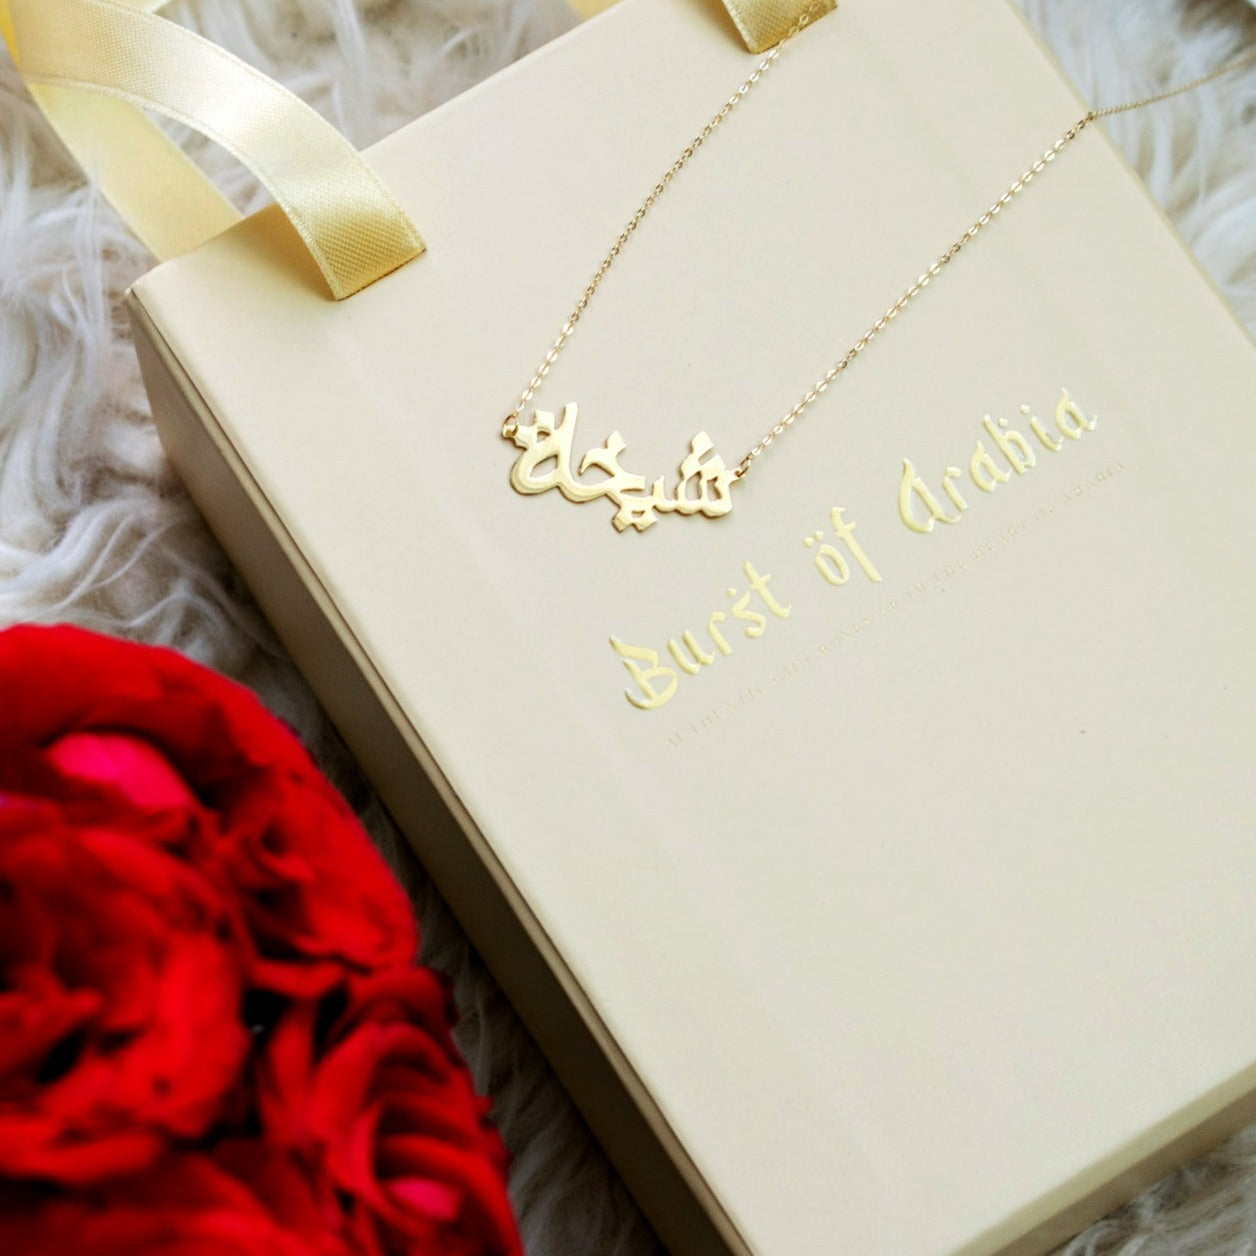 This gorgeous modern gold name necklace is handcrafted in real genuine gold by our skilled jewelers in Dubai. A truly lovely gift. Your loved one's name in gold, creating a uniquely, personal gift. Perfect addition to your jewelry collection or a gift to remember. Designed in the United Arab Emirates.